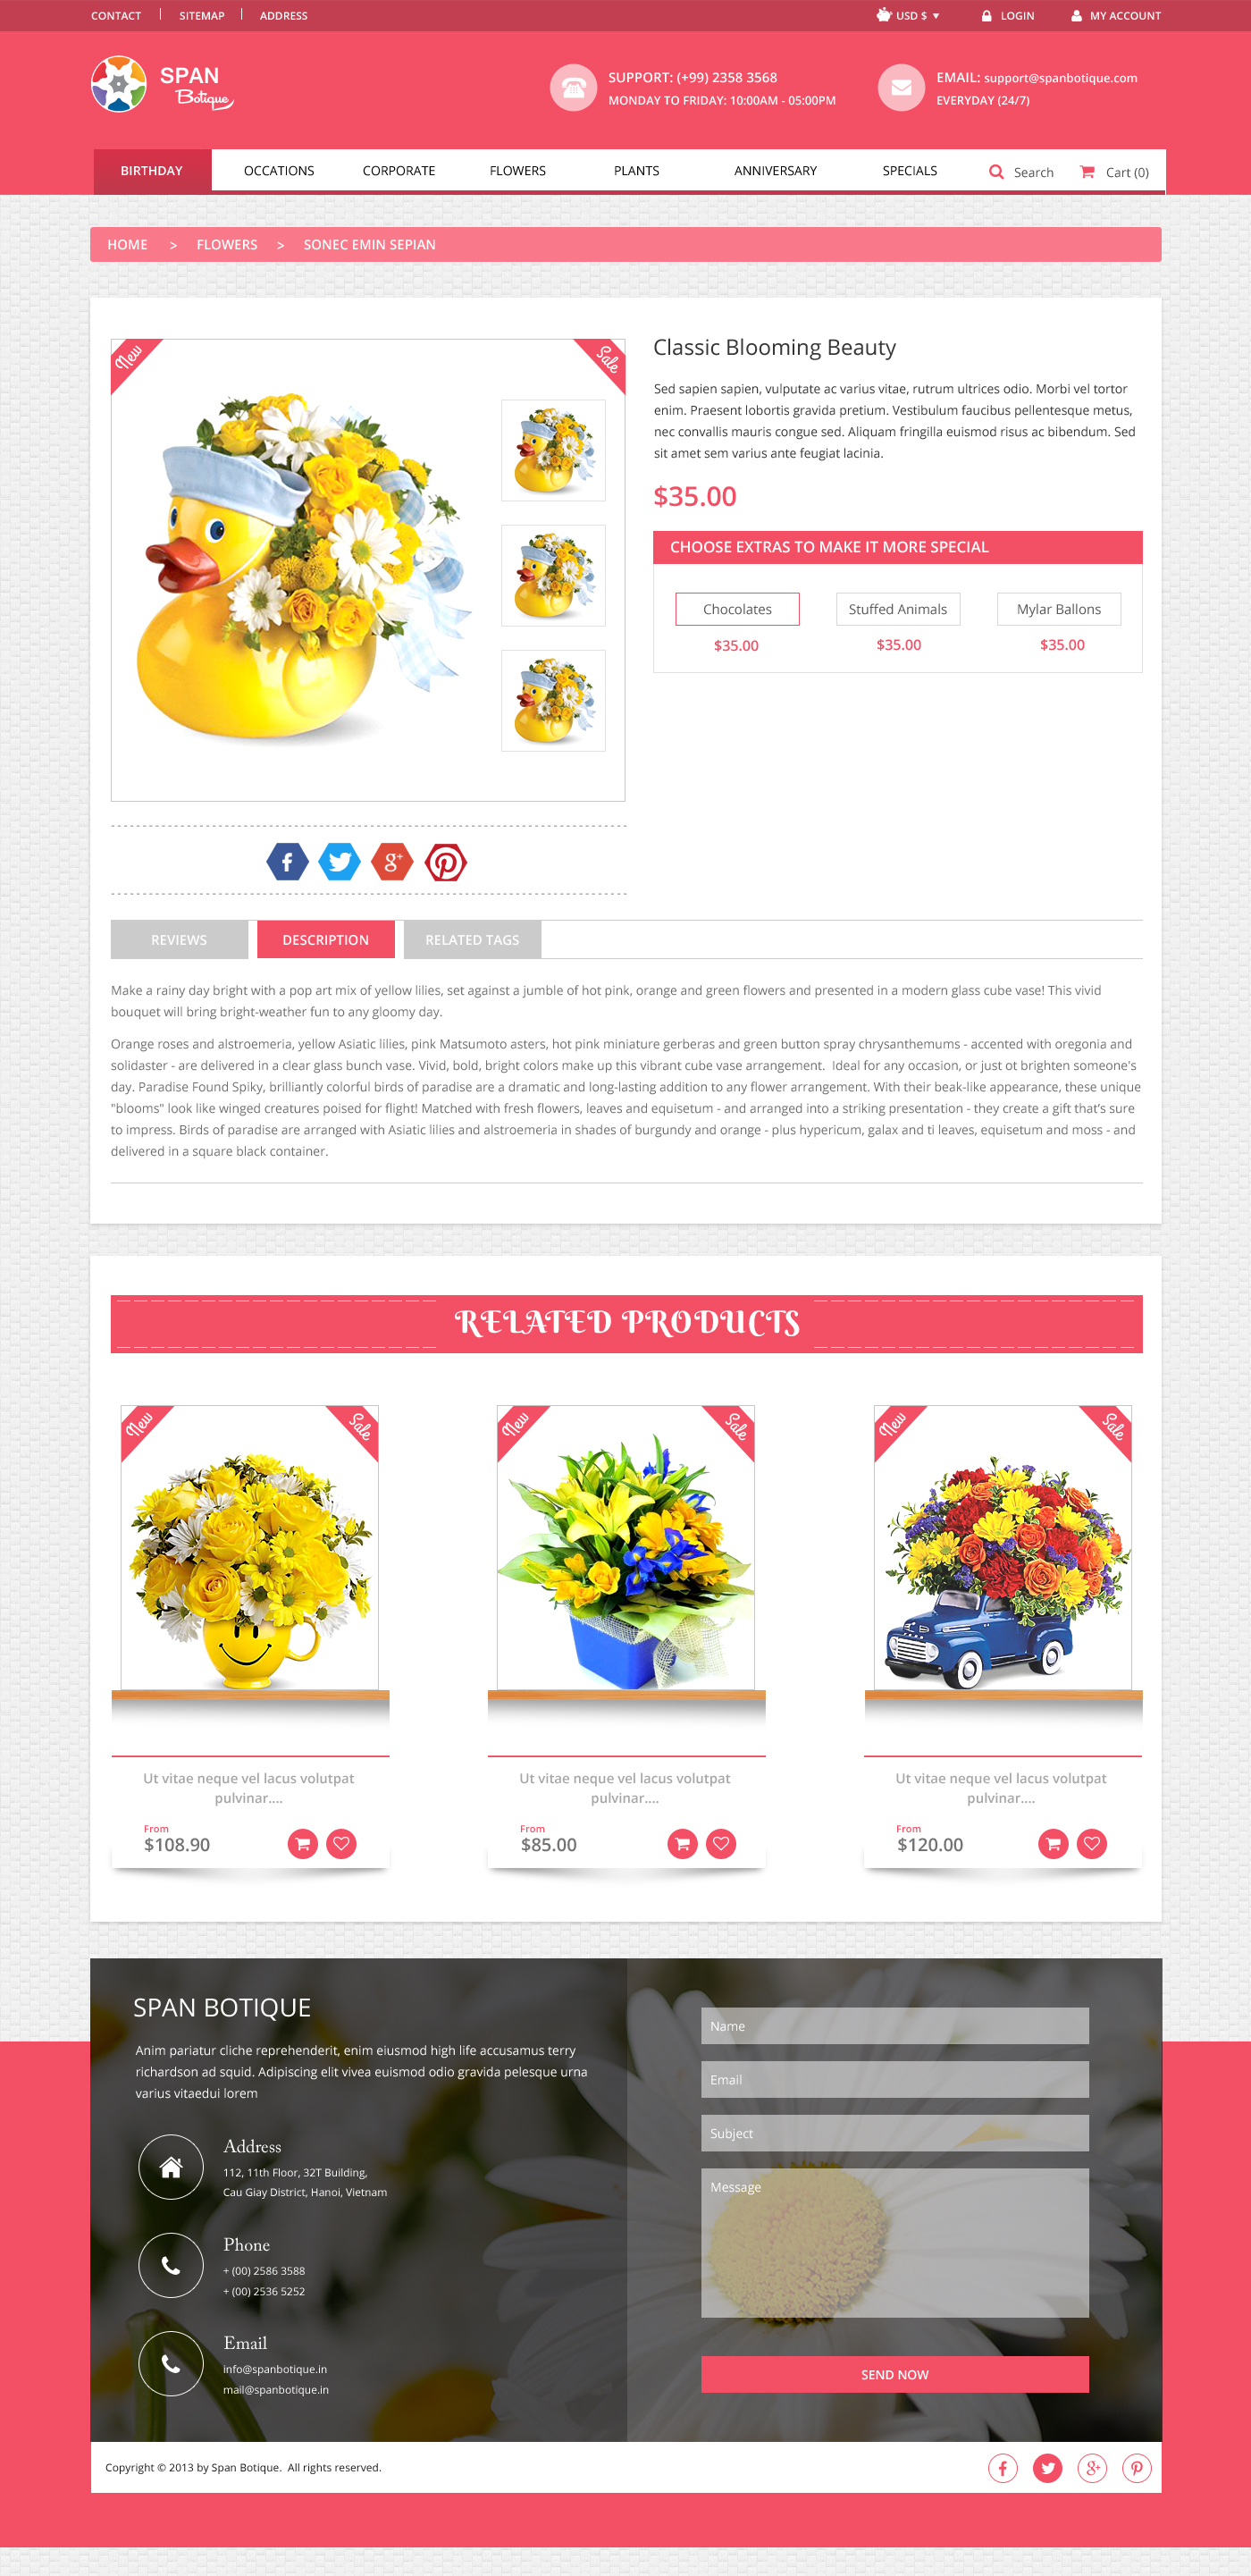 Product View page